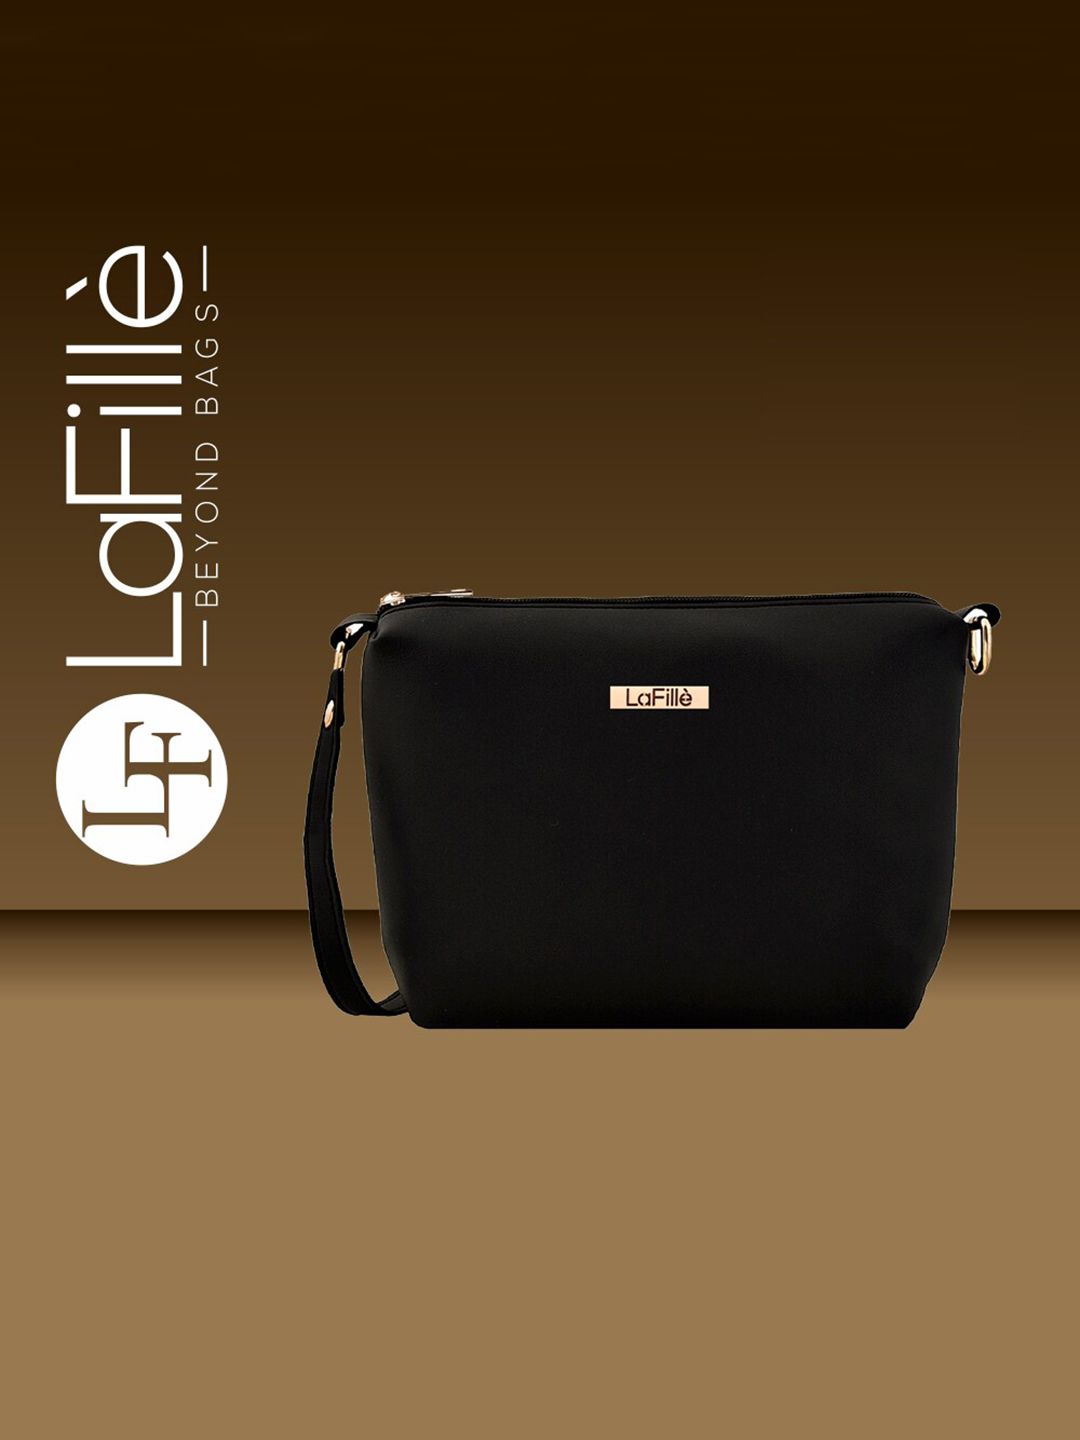 LaFille Black PU Structured Sling Bag Price in India